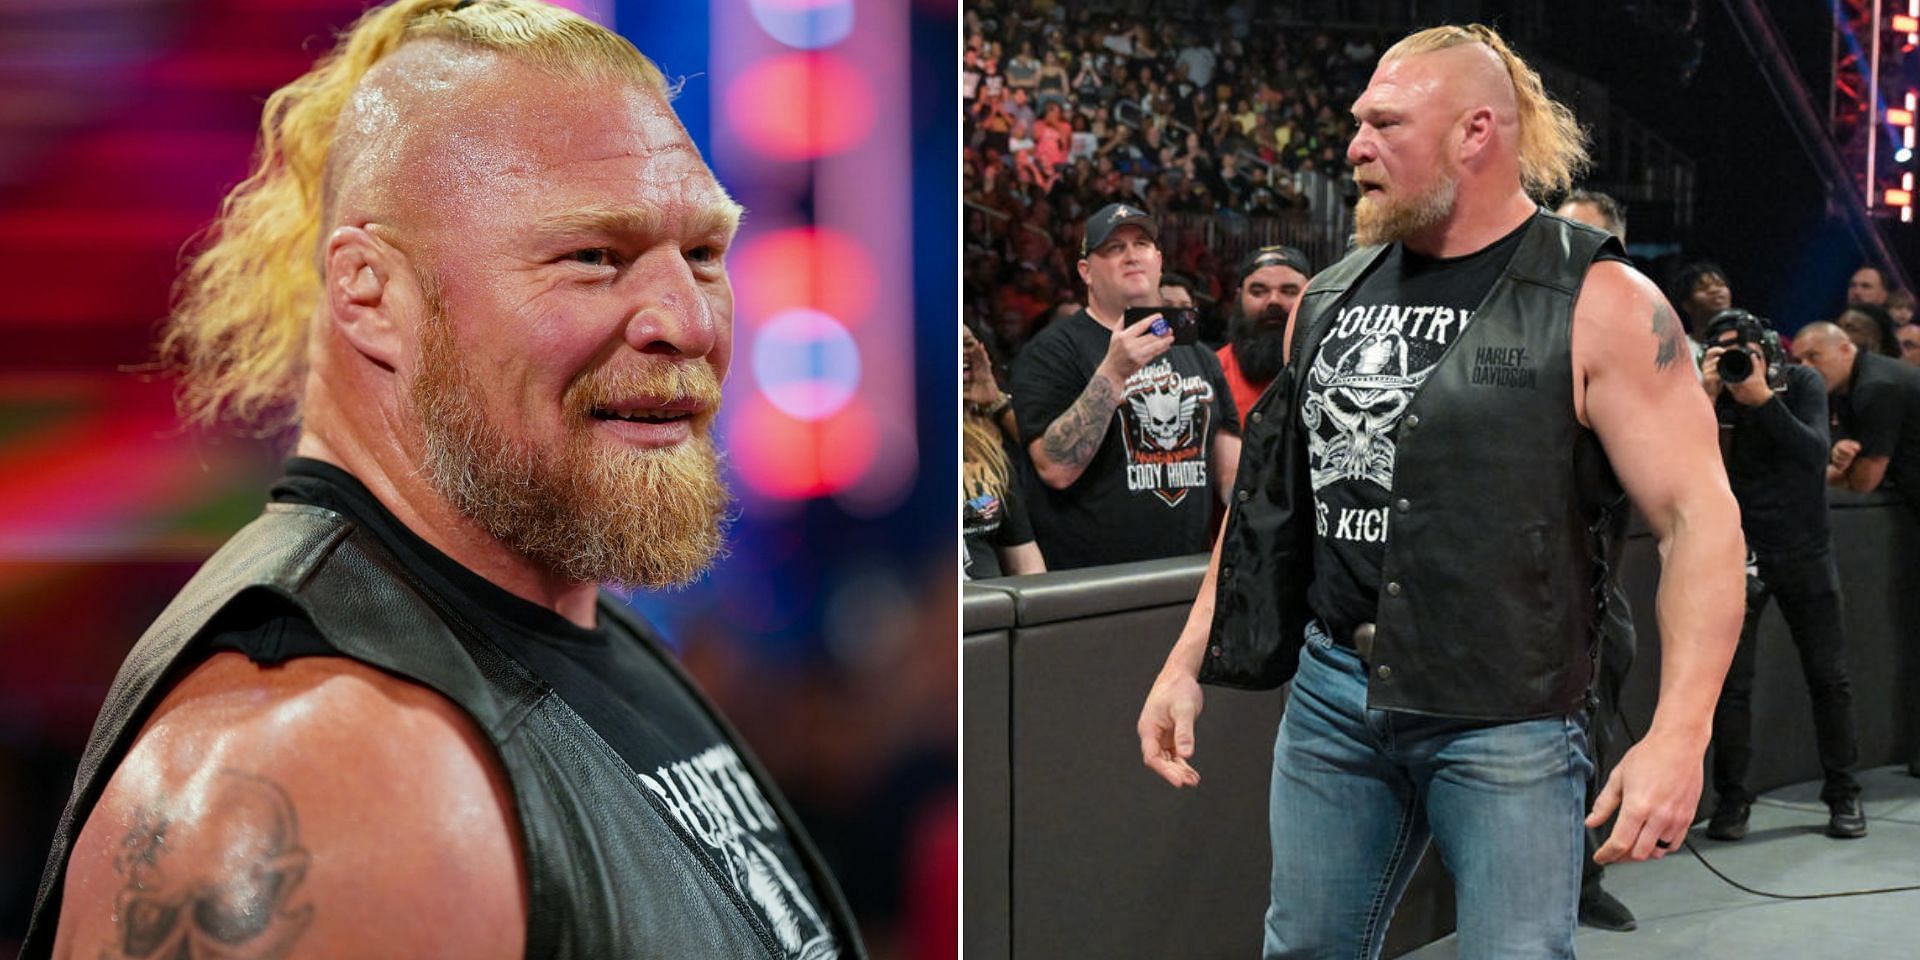 Brock Lesnar returned to WWE on RAW this week